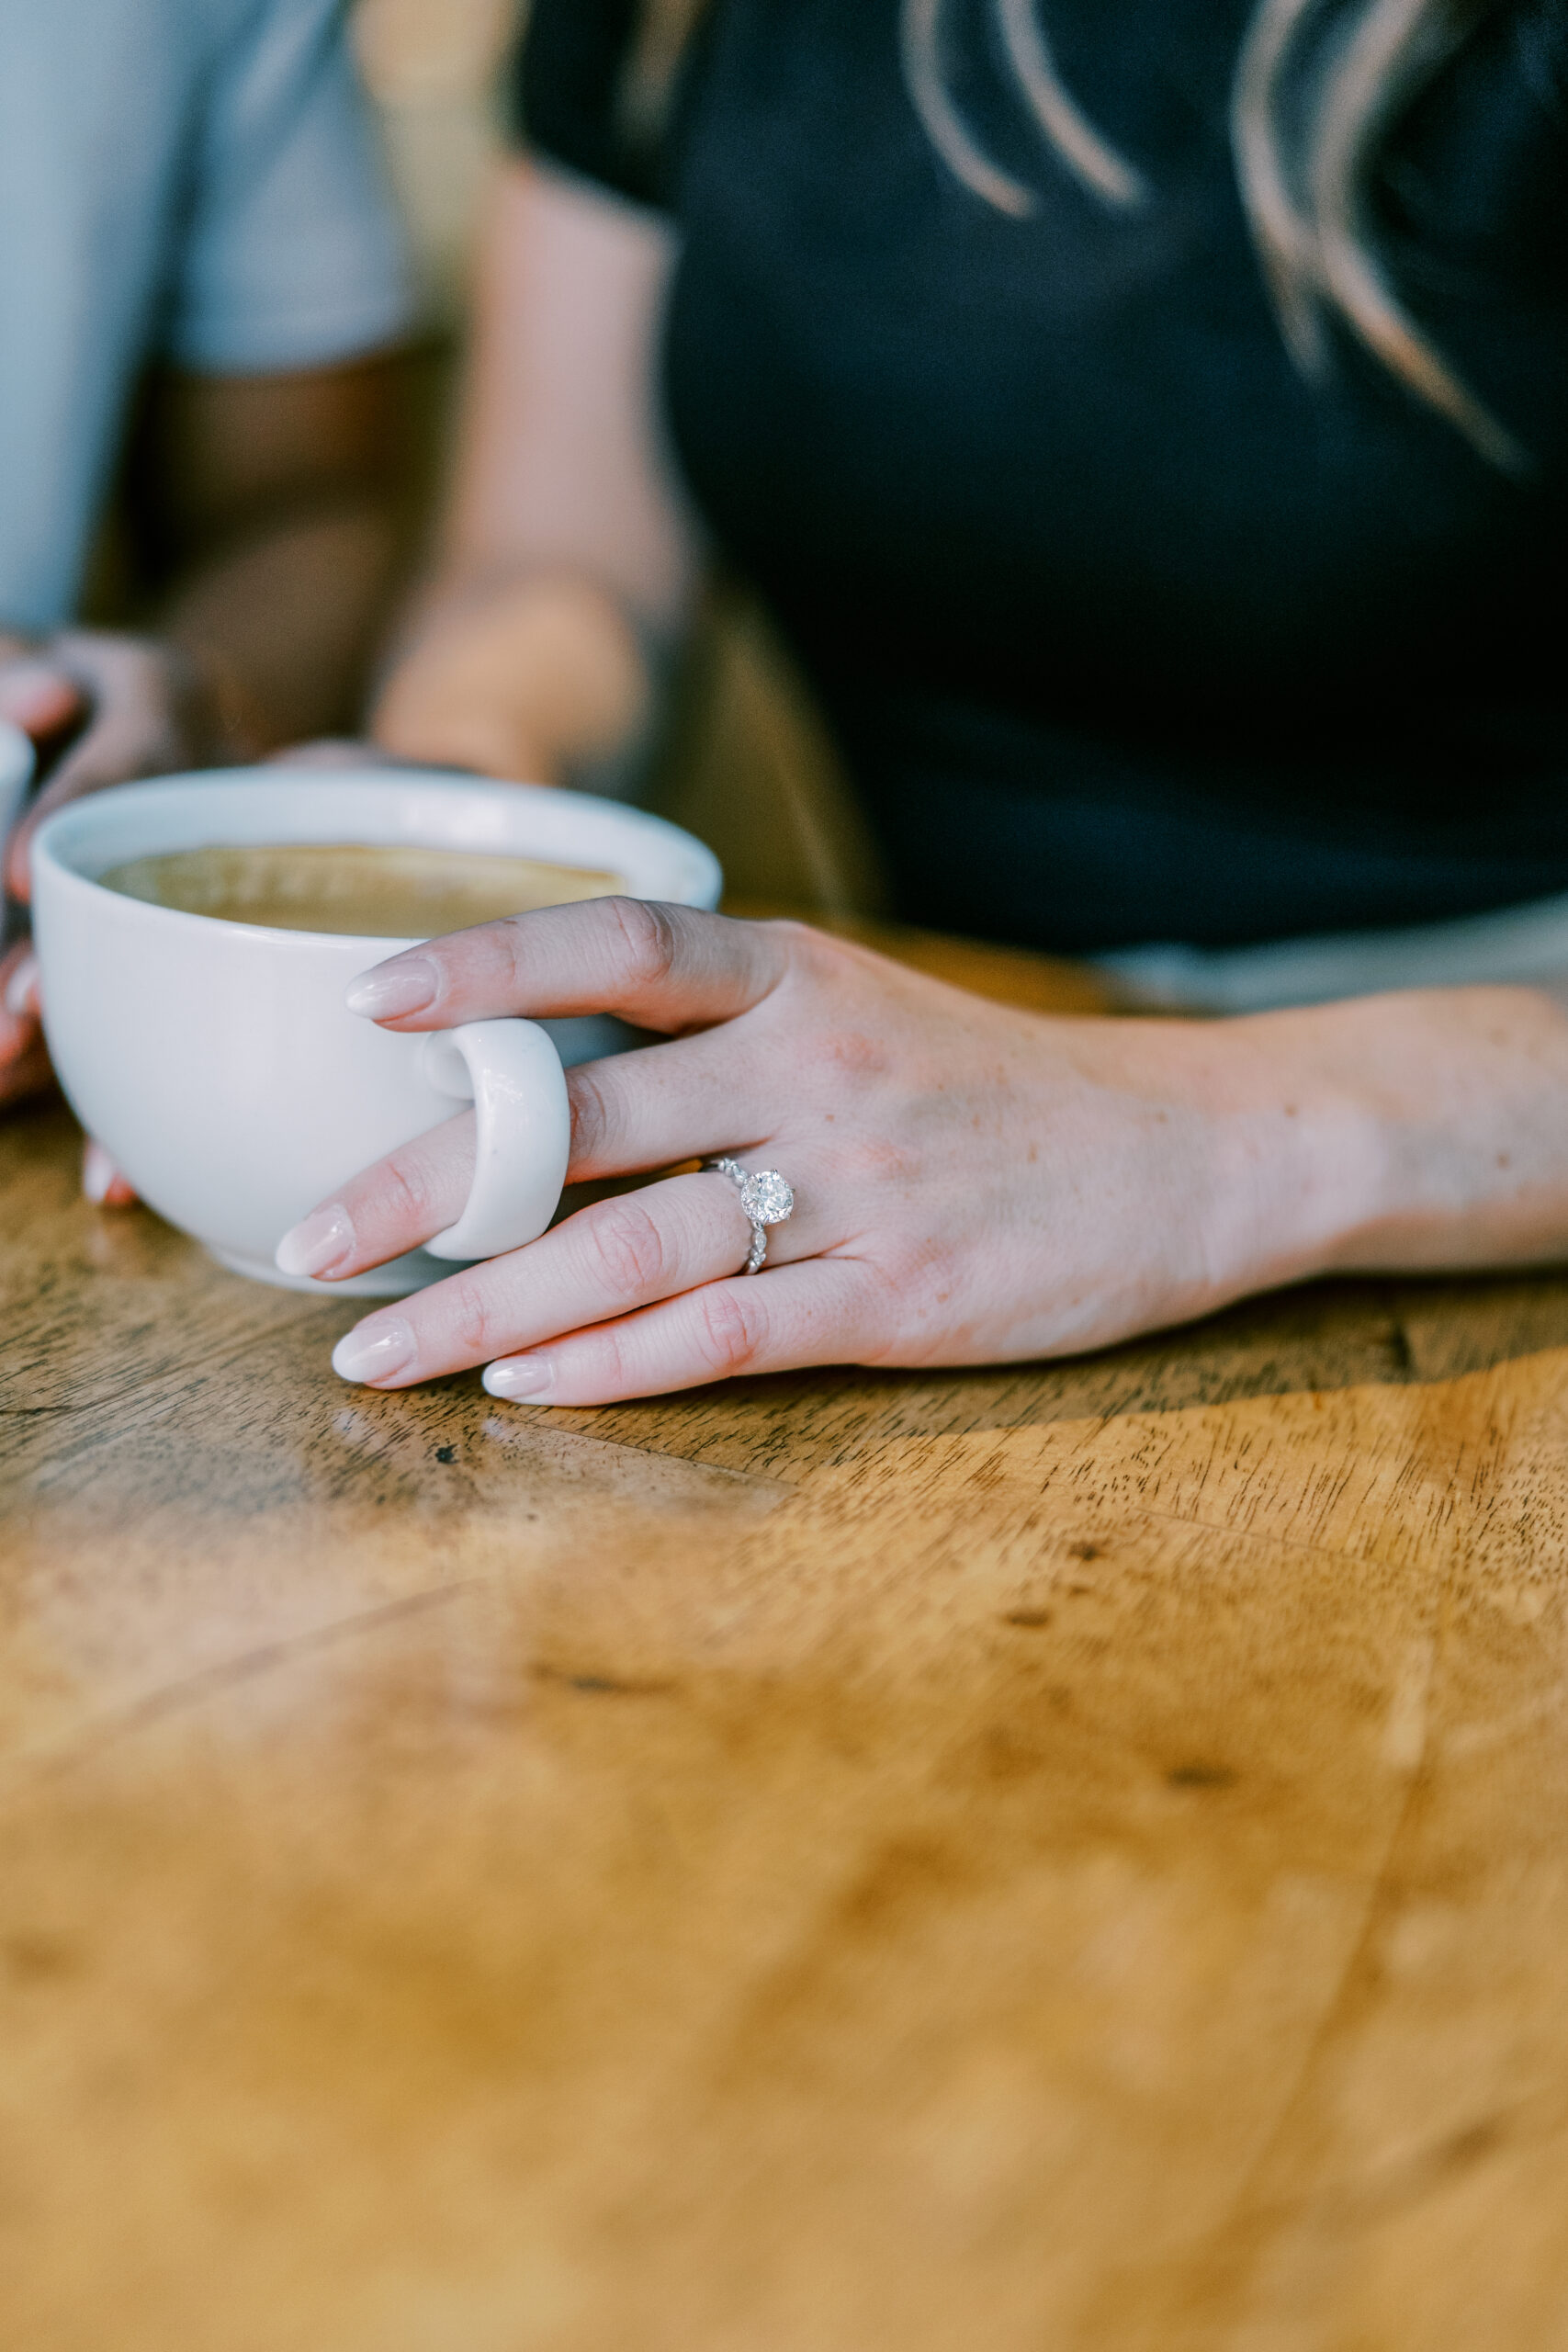 Detail photo of woman's hand on her coffee cup with her left hand, she has a diamond engagement ring on her finger